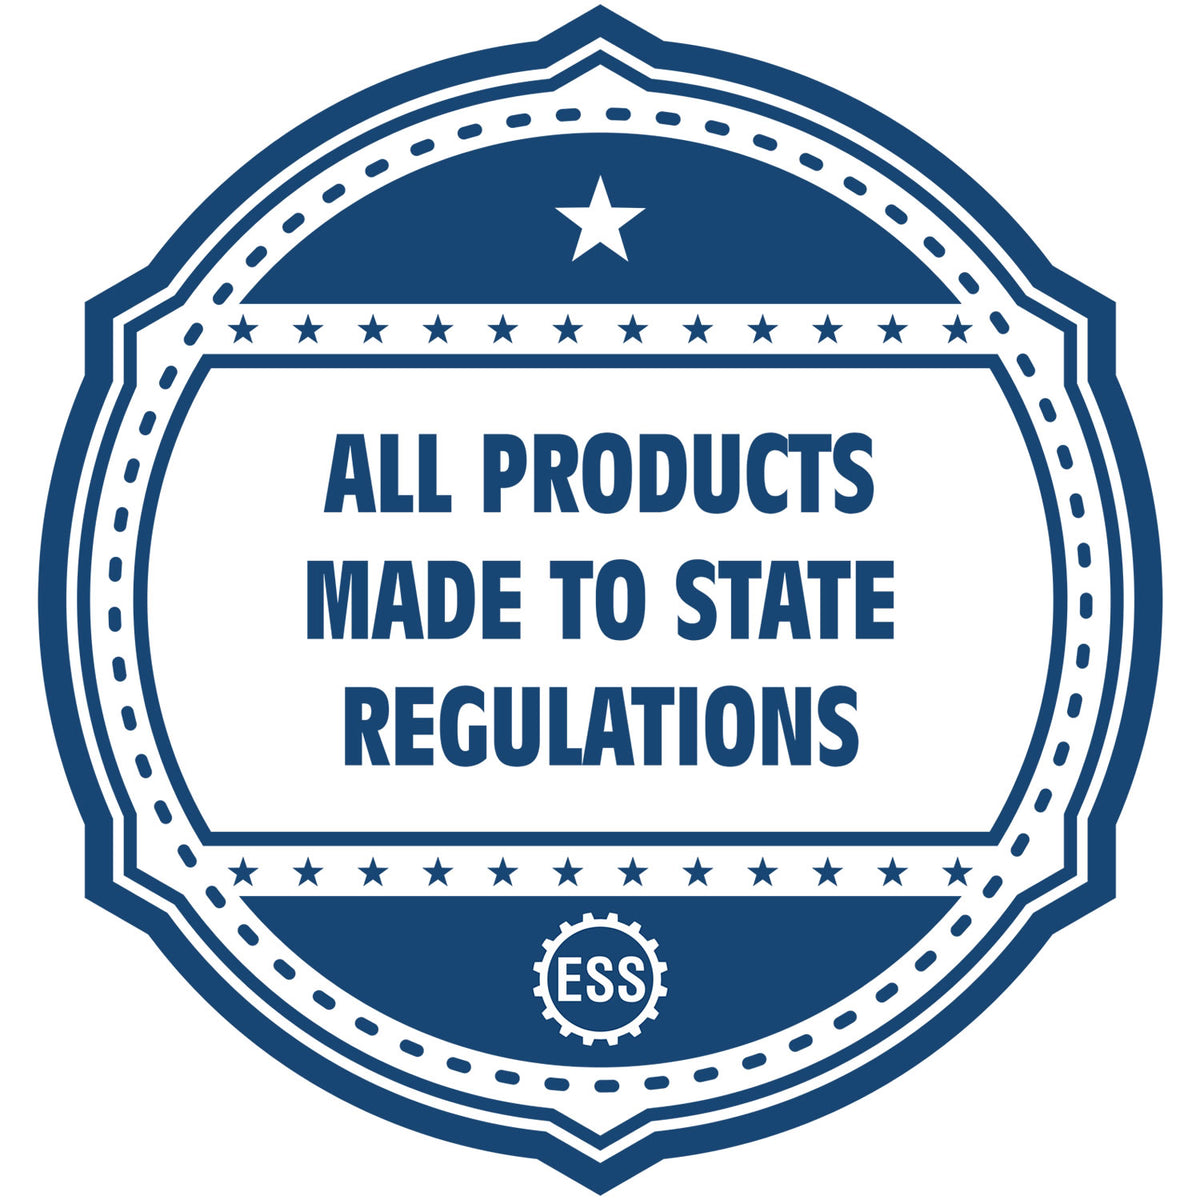 An icon or badge element for the State of Missouri Architectural Seal Embosser showing that this product is made in compliance with state regulations.